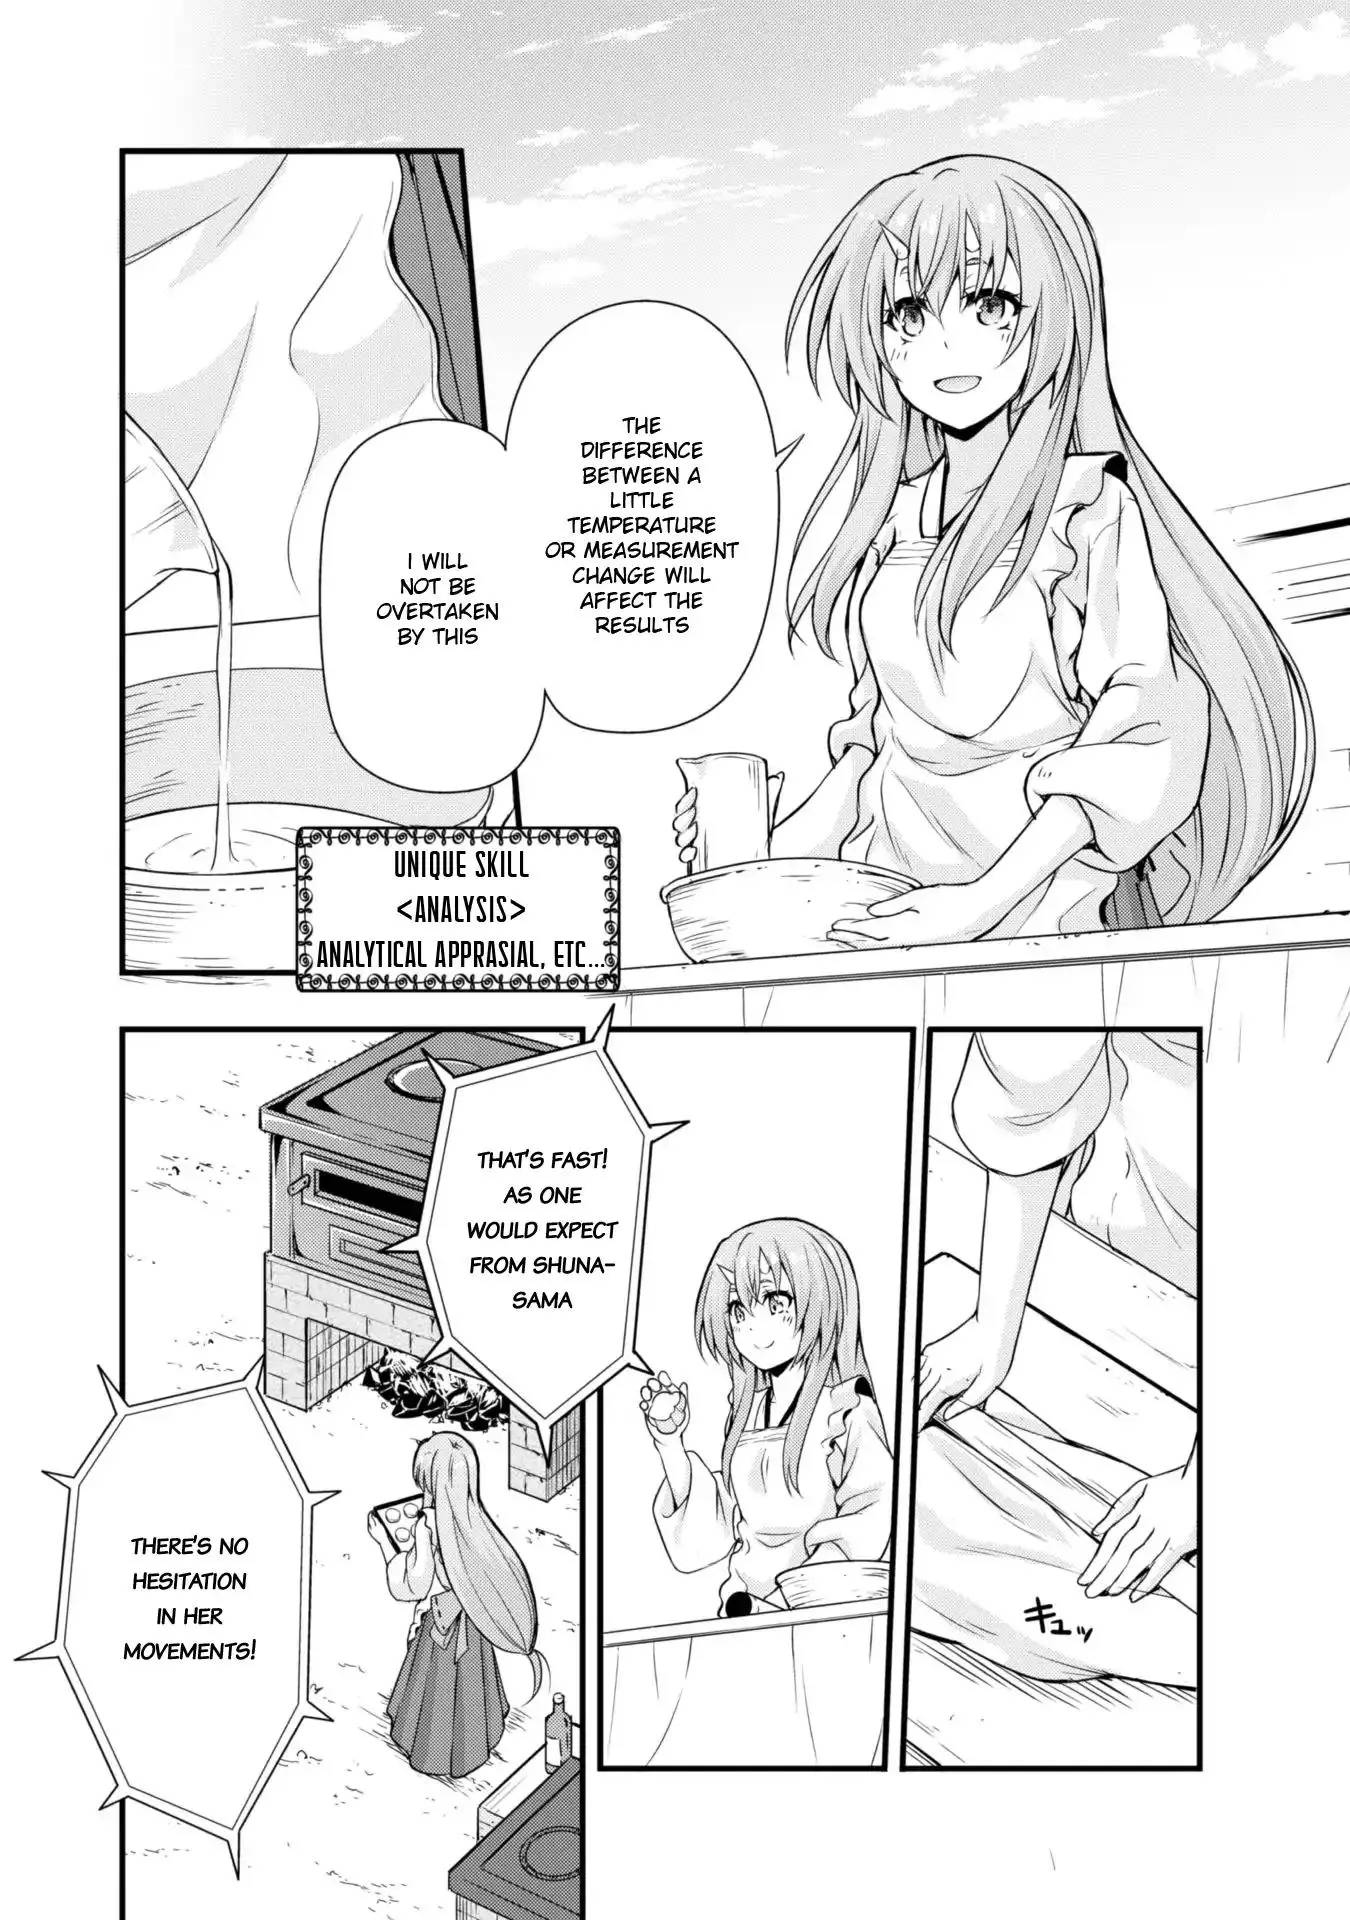 Tensei Shitara Slime Datta Ken: The Ways of Strolling in the Demon Country - 17 page 15